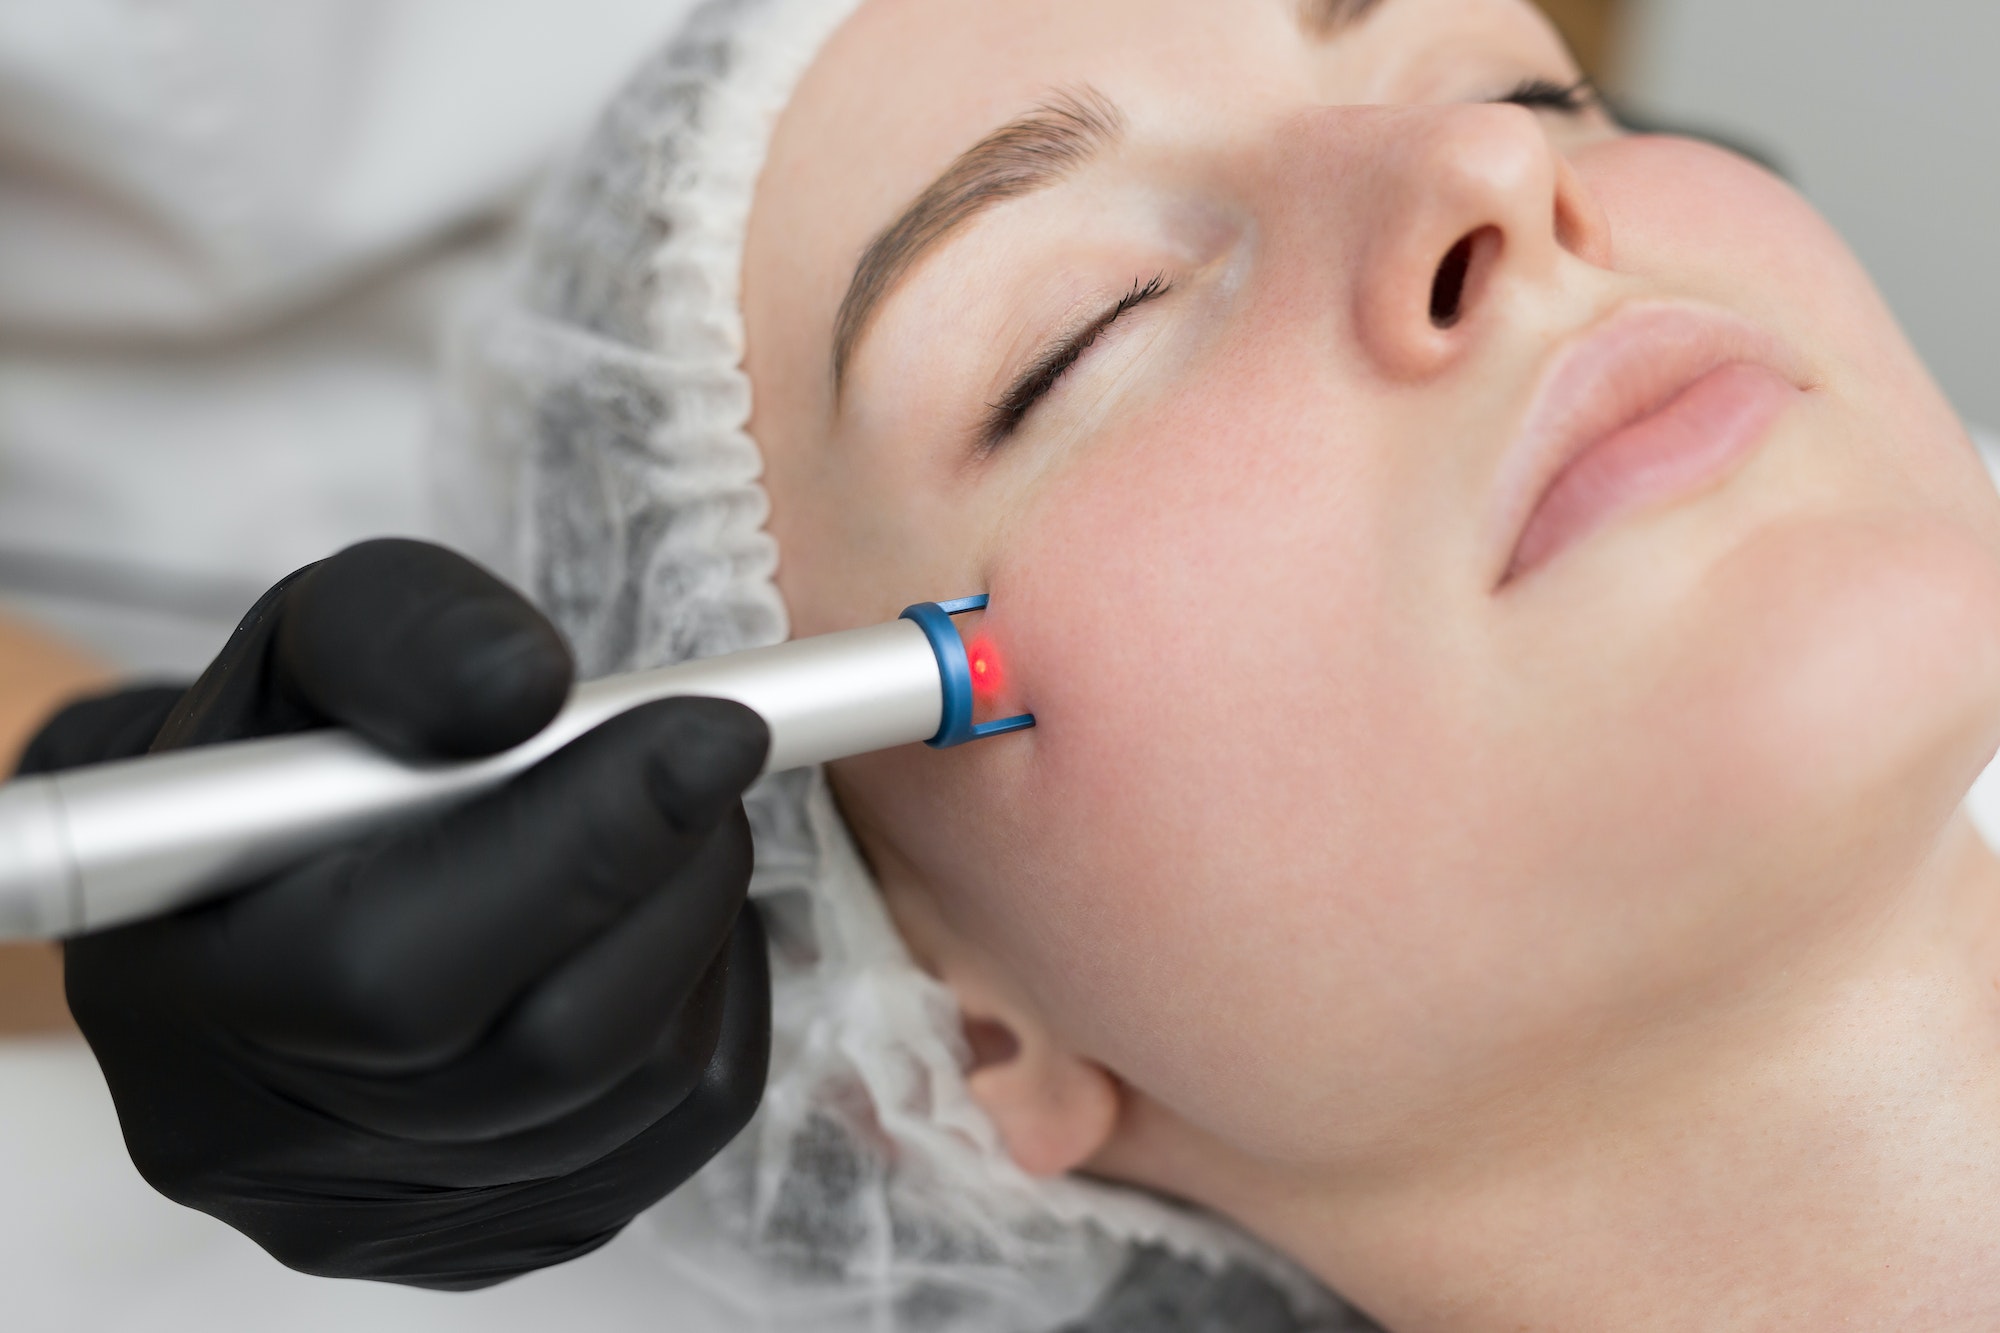 Close-up removal of blood vessels on the face of a diode laser in a cosmetic clinic. Therapist